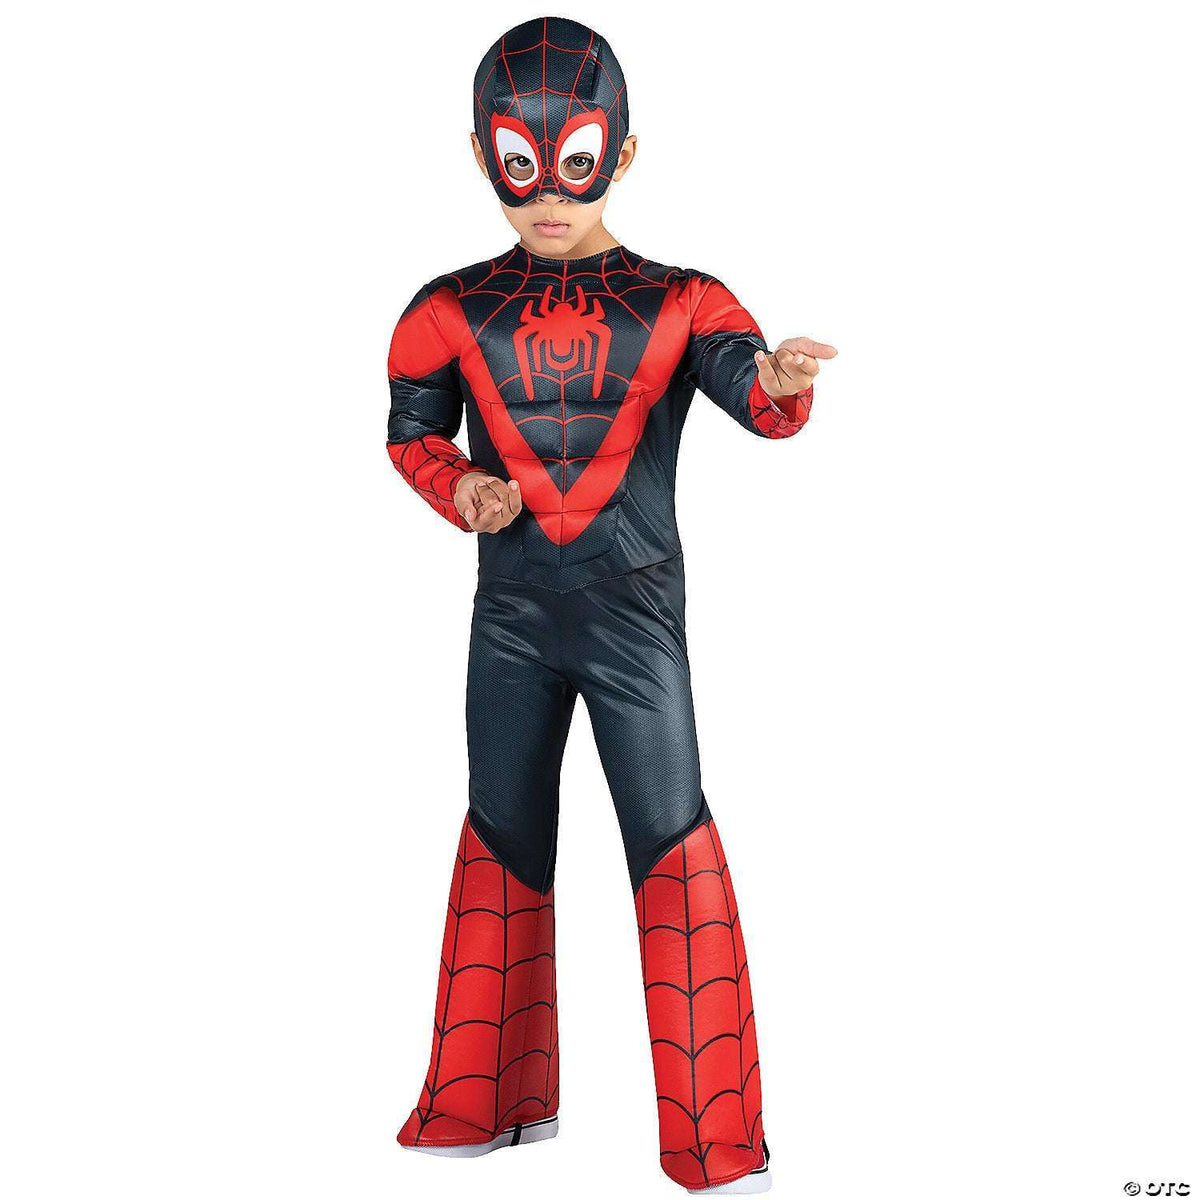 Marvel Miles Morales Spiderman Toddler Costume in 3T-4T with Matching Mask